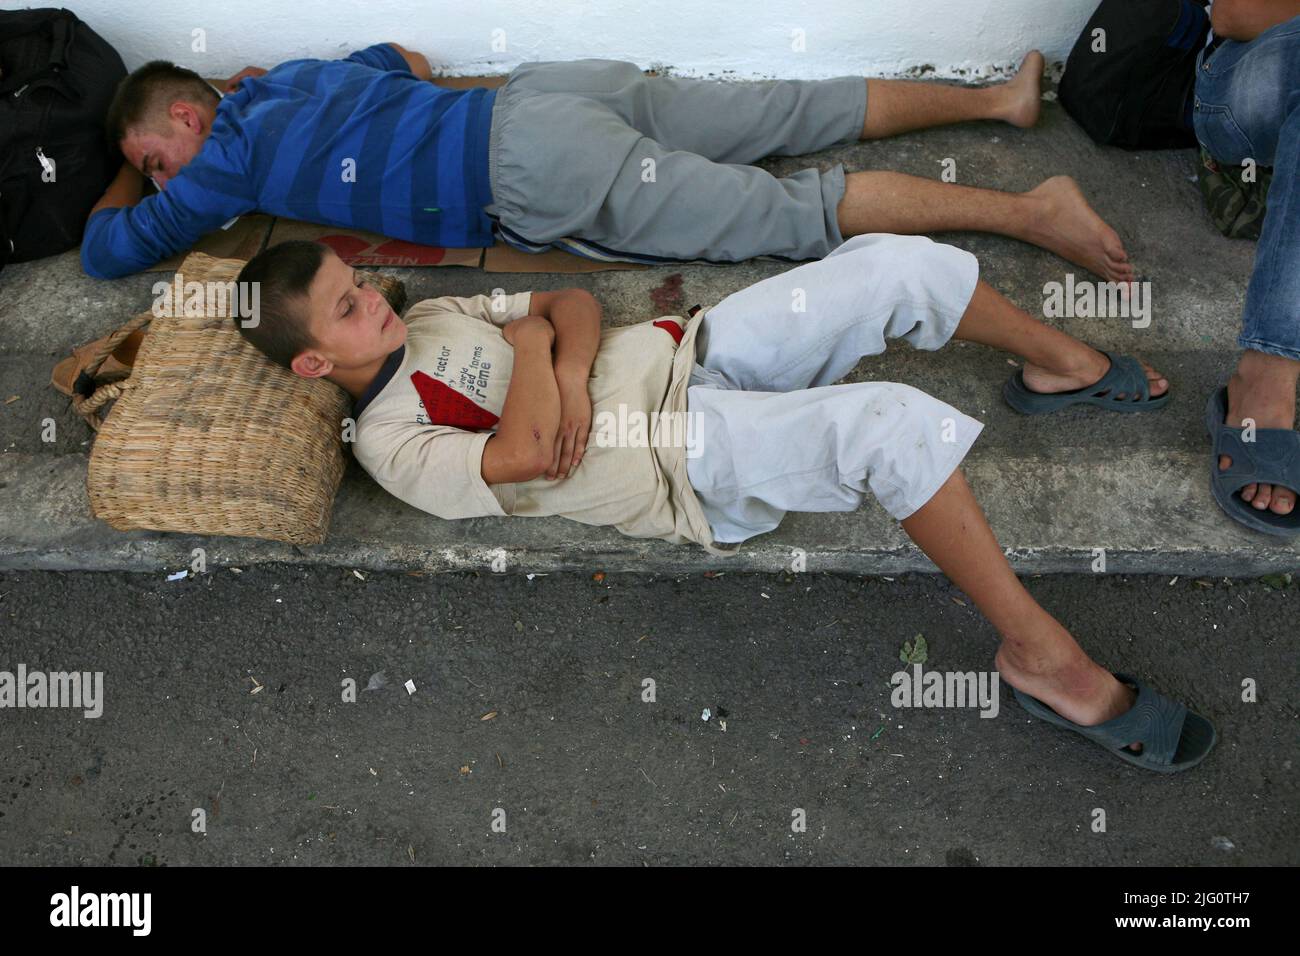 Kırkpınar (Turkish Oil Wrestling). Young wrestlers sleep as they wait for the beginning of the opening ceremony next to the stadium during the 648th Kırkpınar Tournament in Edirne, Turkey, on 3 July 2009. Stock Photo